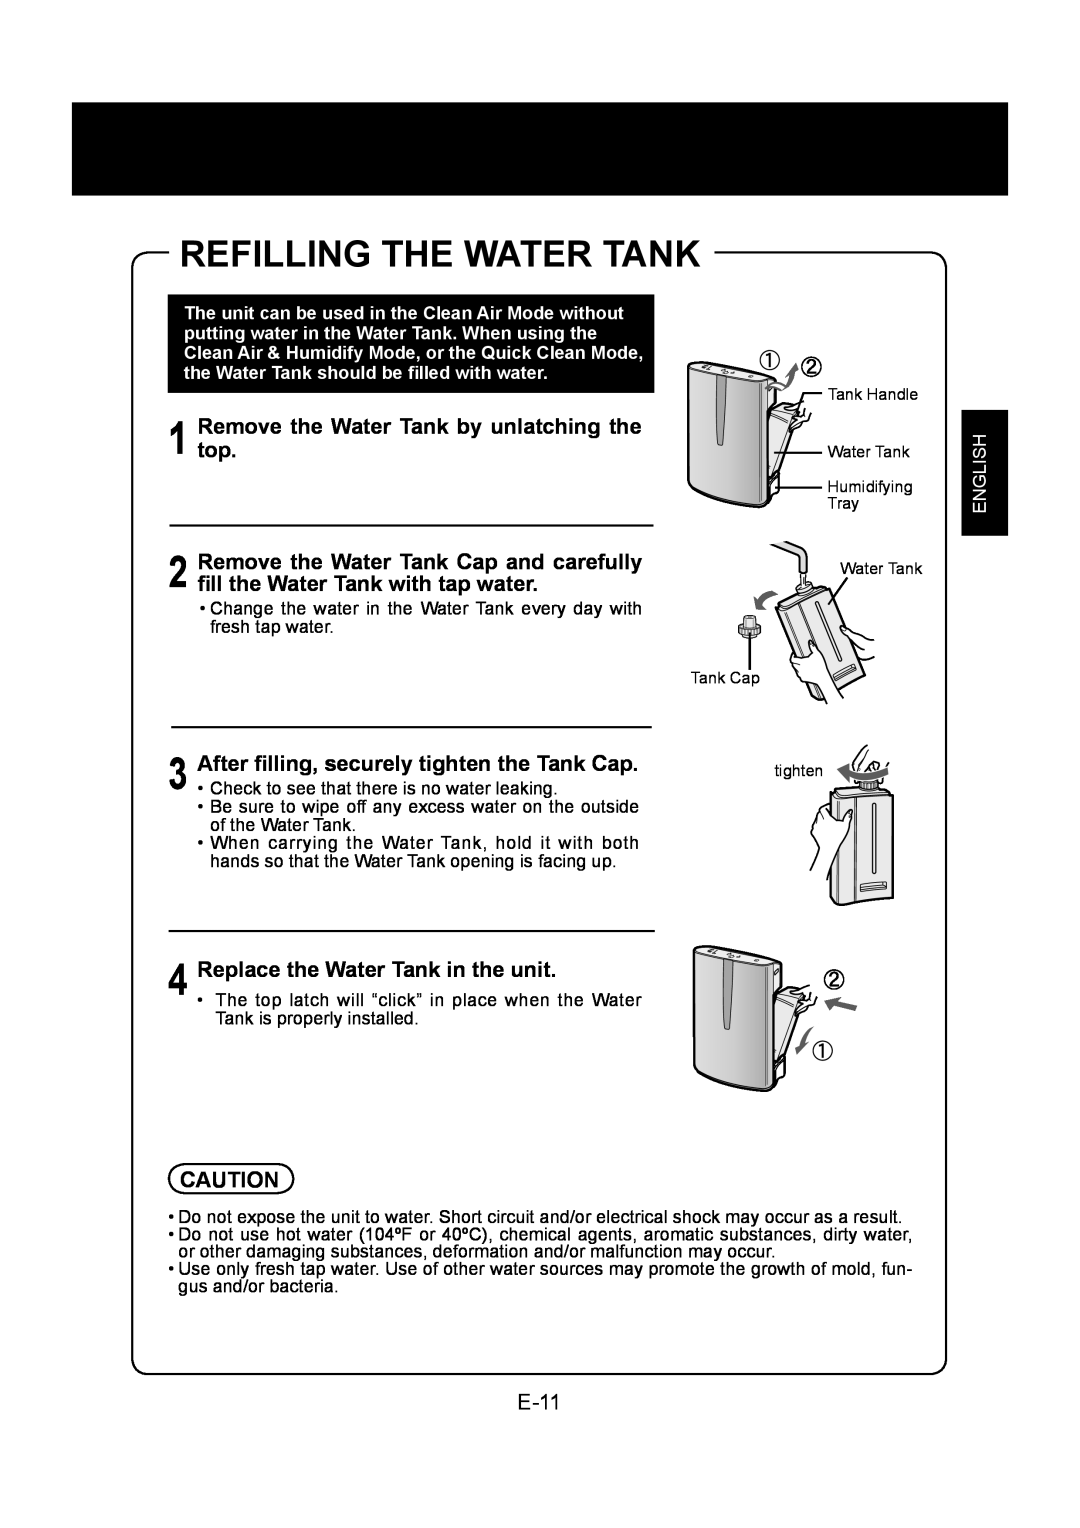 Sharp KC-860U Refilling The Water Tank, 1 top.Remove the Water Tank by unlatching the, ﬁll the Water Tank with tap water 